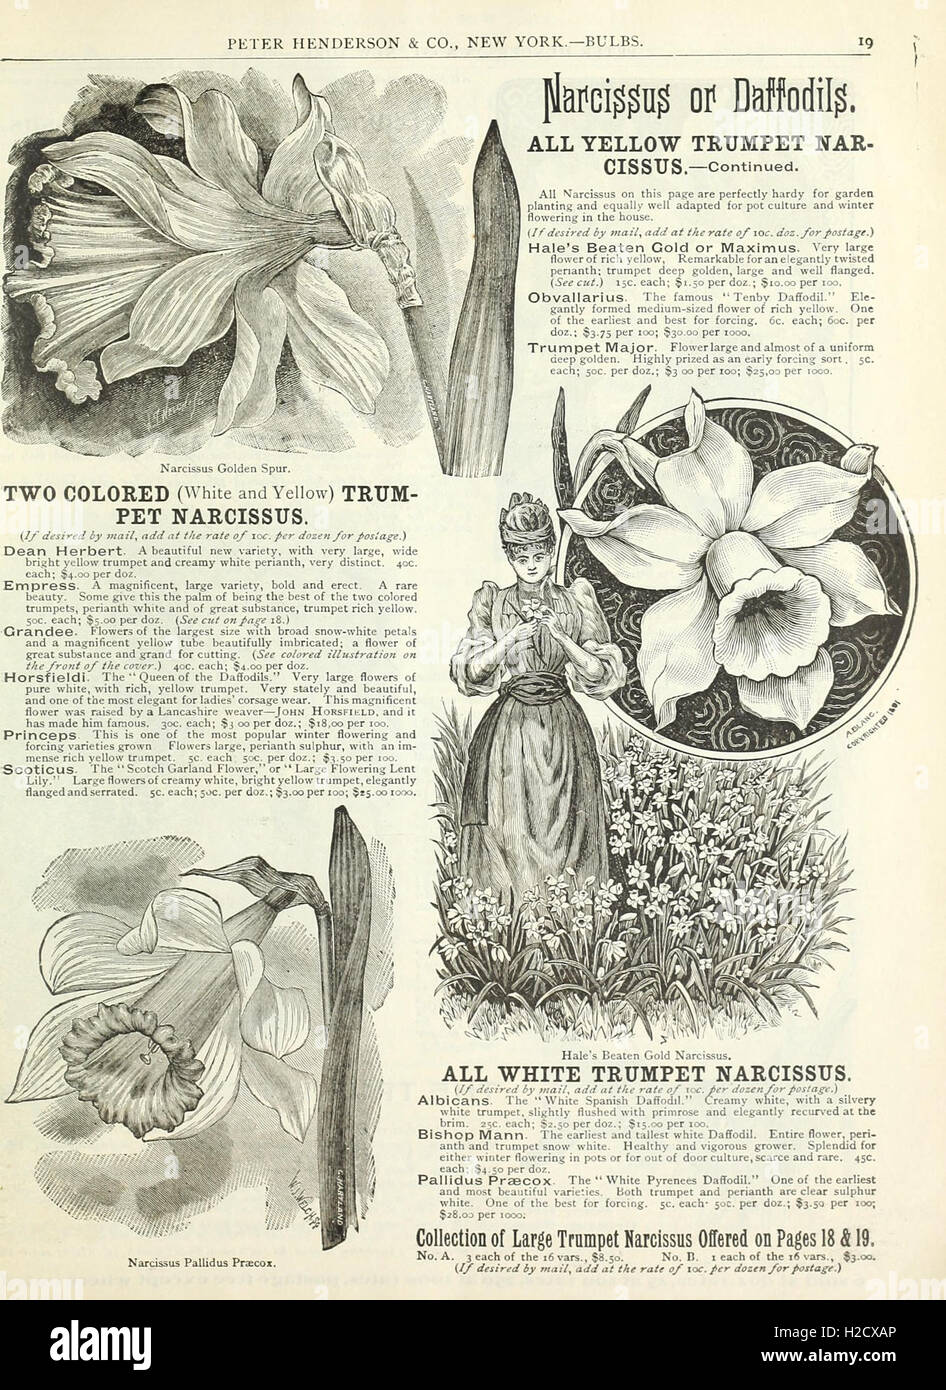 1892 (Page 19) Stock Photo